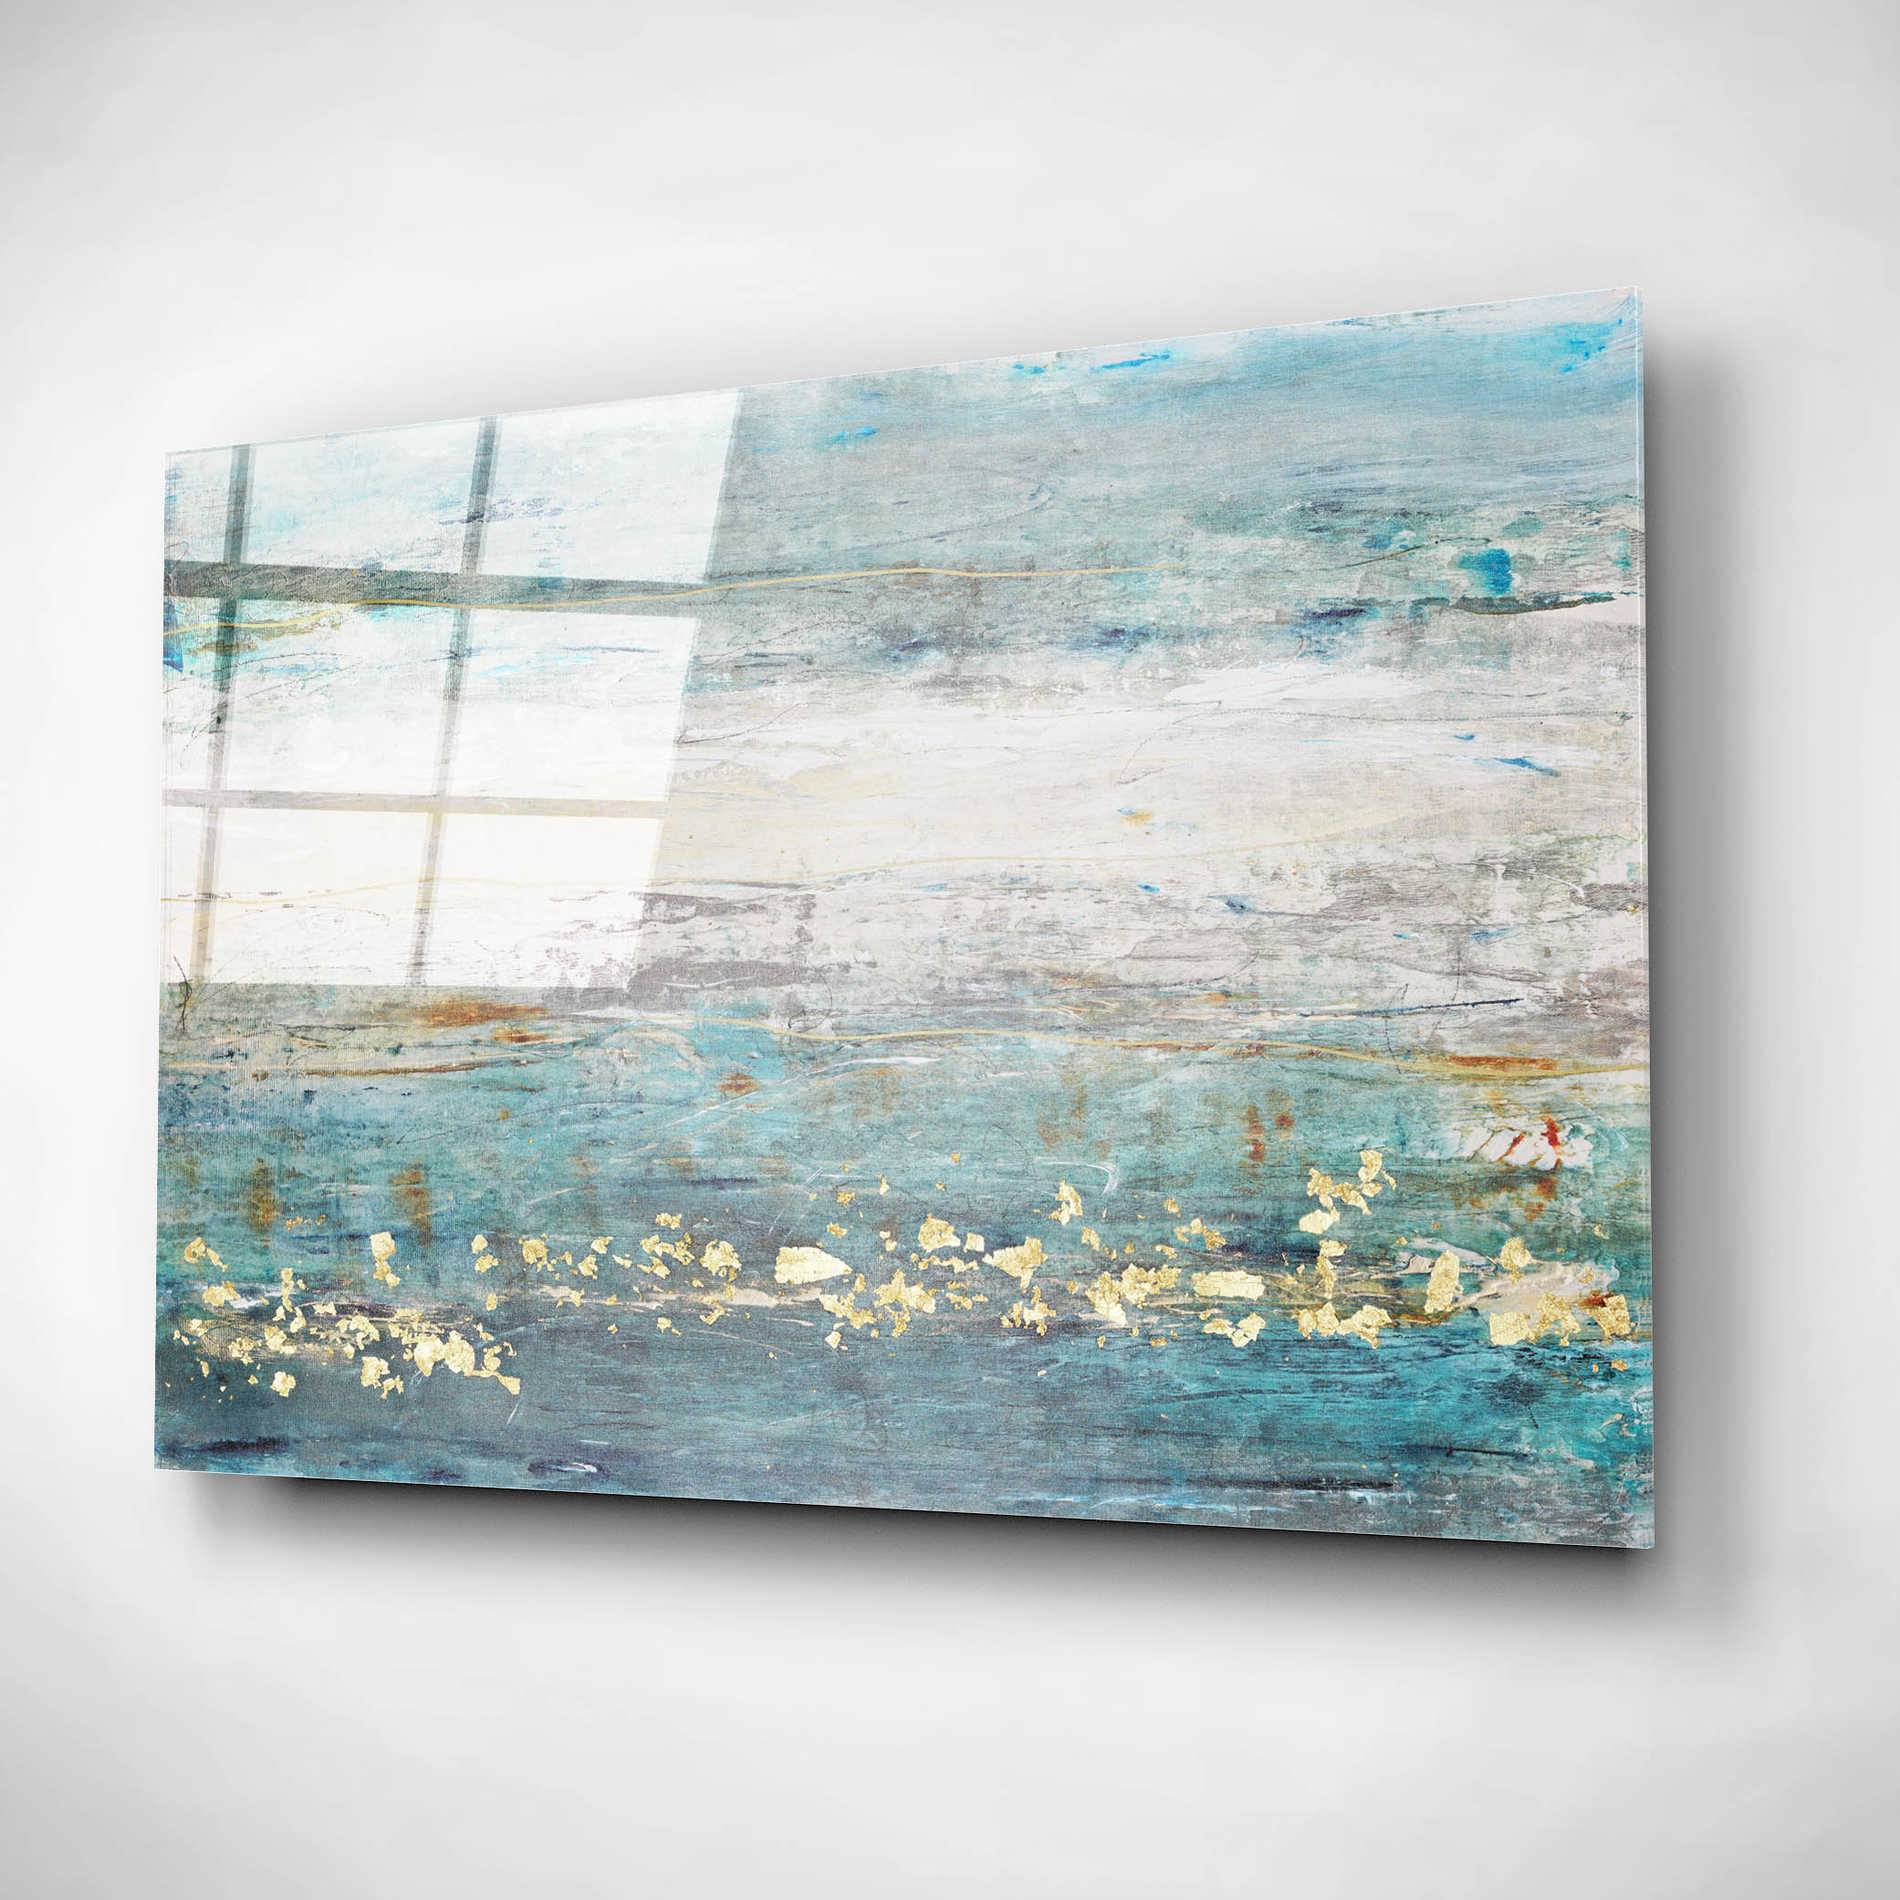 Epic Art 'Accent II' by Tim O'Toole, Acrylic Glass Wall Art,24x16